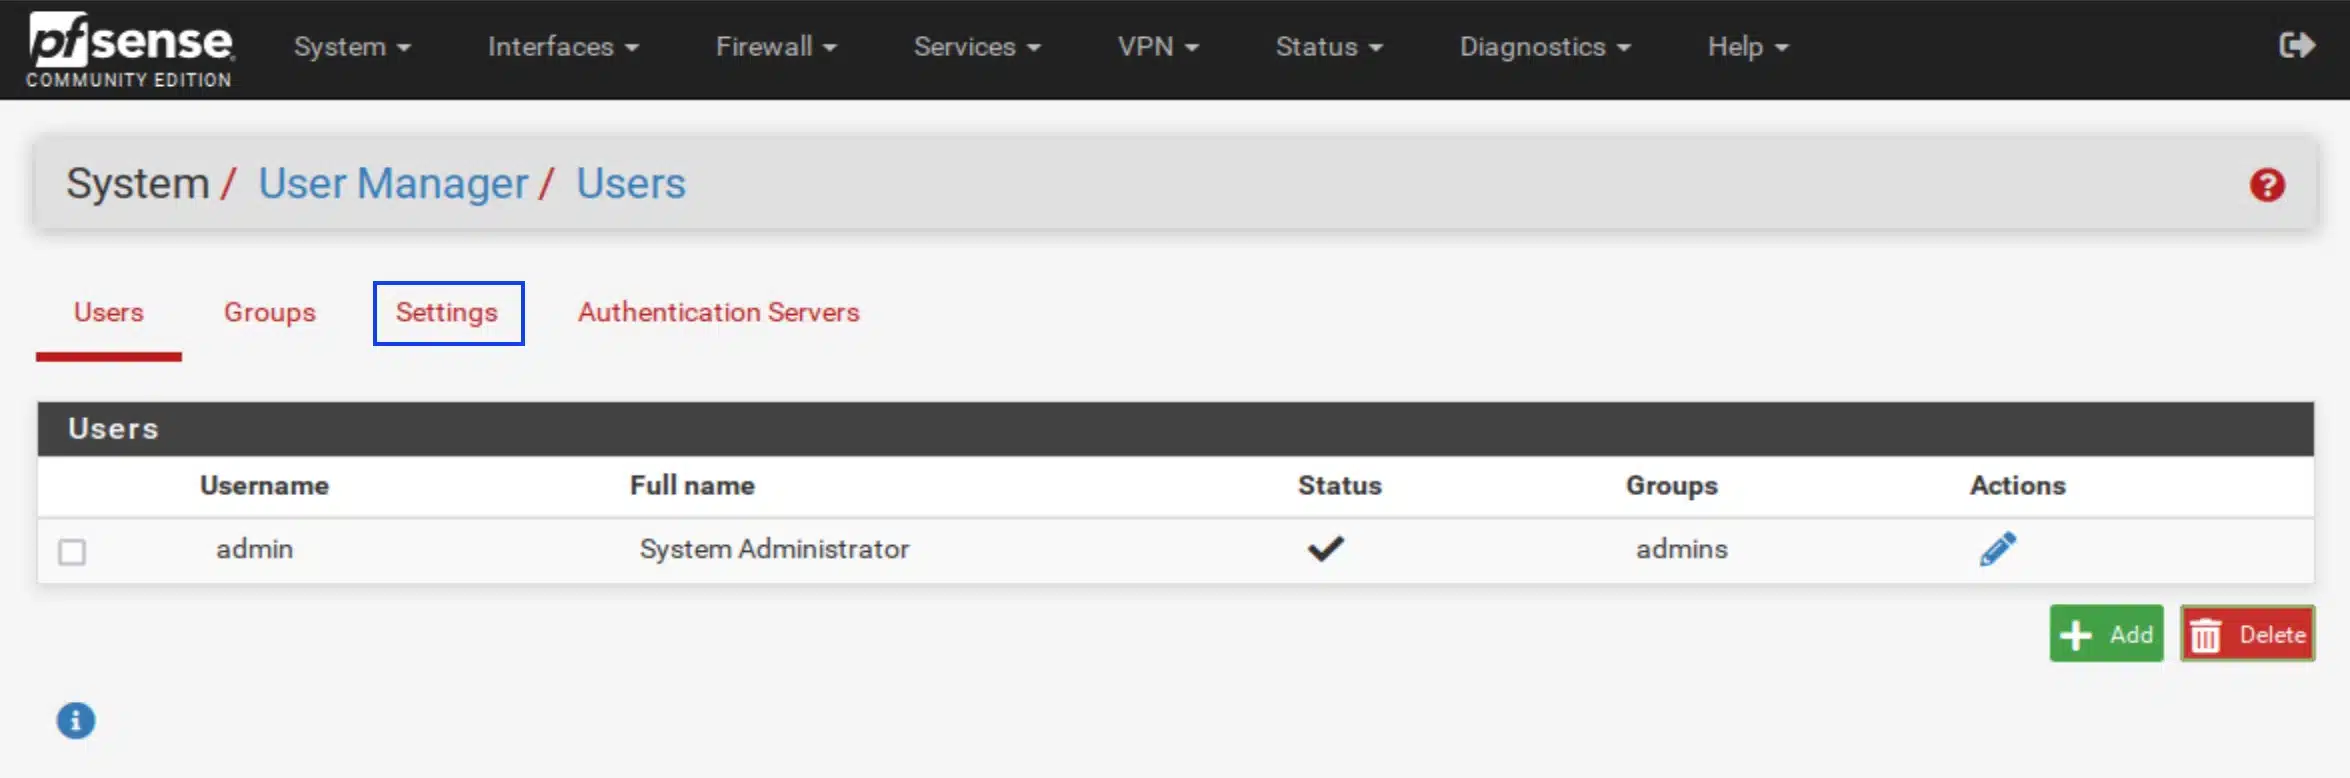 pfSense - CP - Go to User Manager - Settings Tab